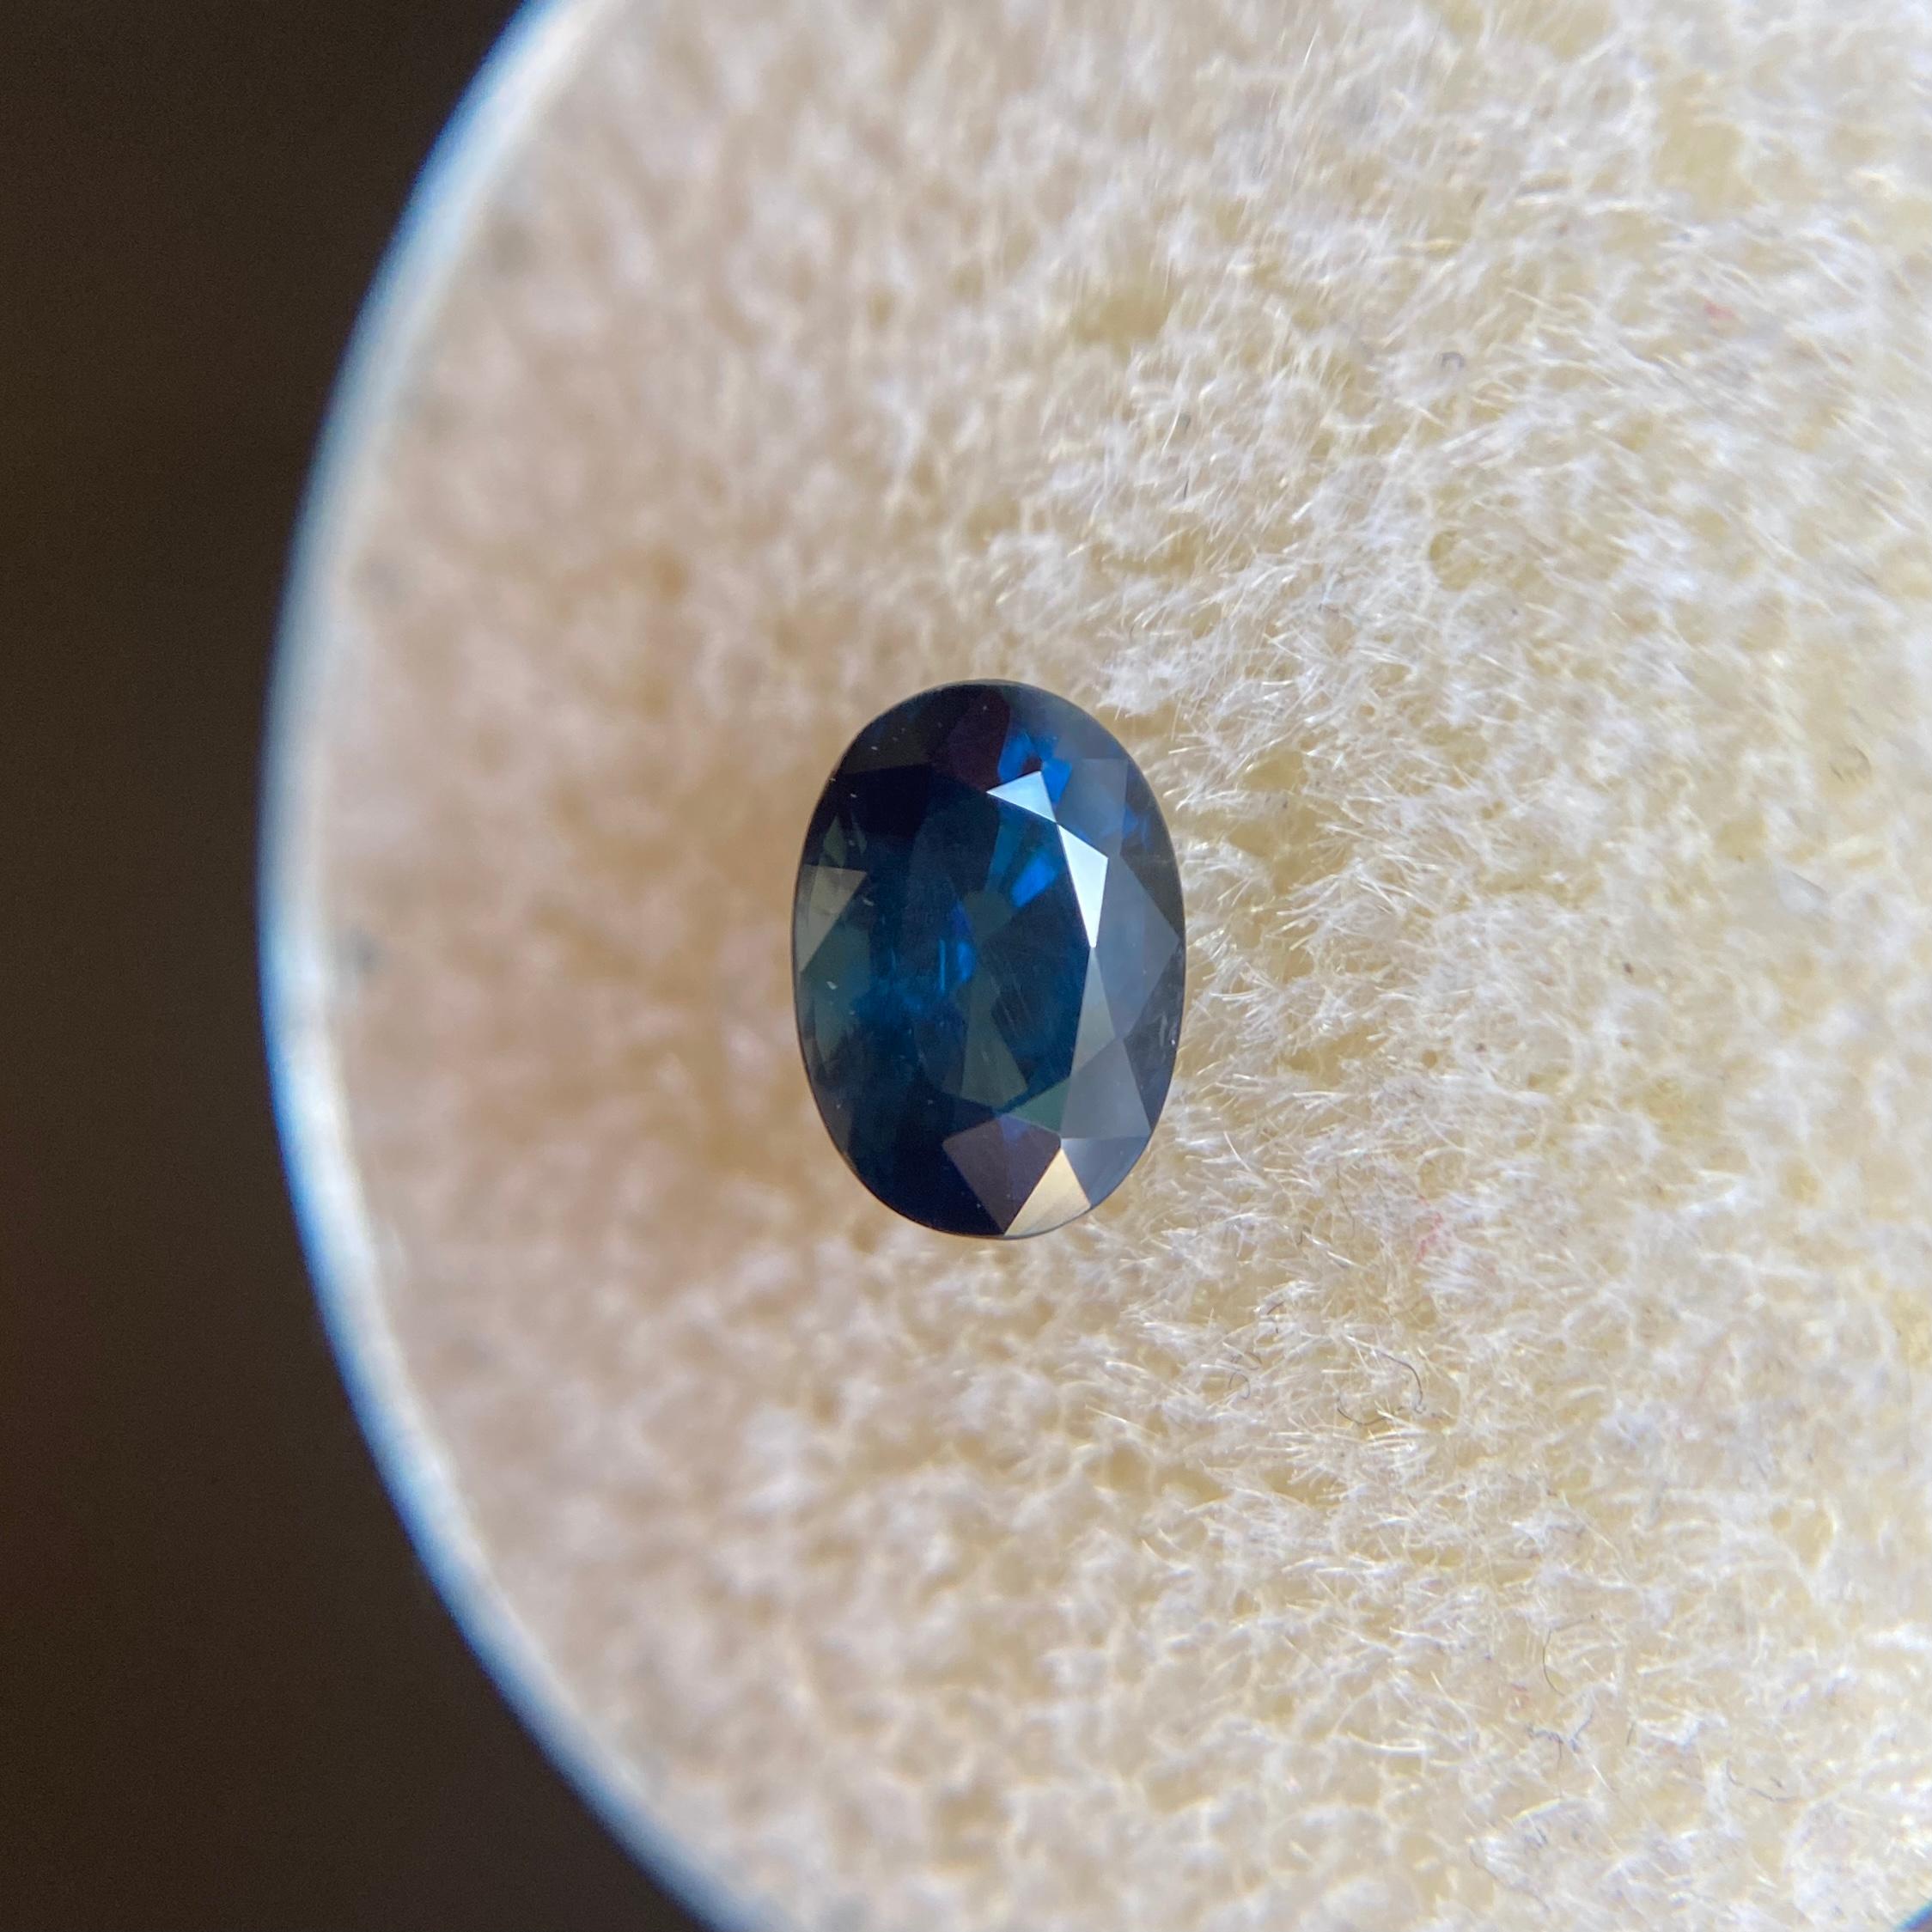 Fine Natural Australian Blue Sapphire Gemstone.

0.87 Carat with a beautiful deep fine blue colour and good clarity, a clean stone with only some small natural inclusions visible when looking closely.

Also has an excellent oval cut and ideal polish